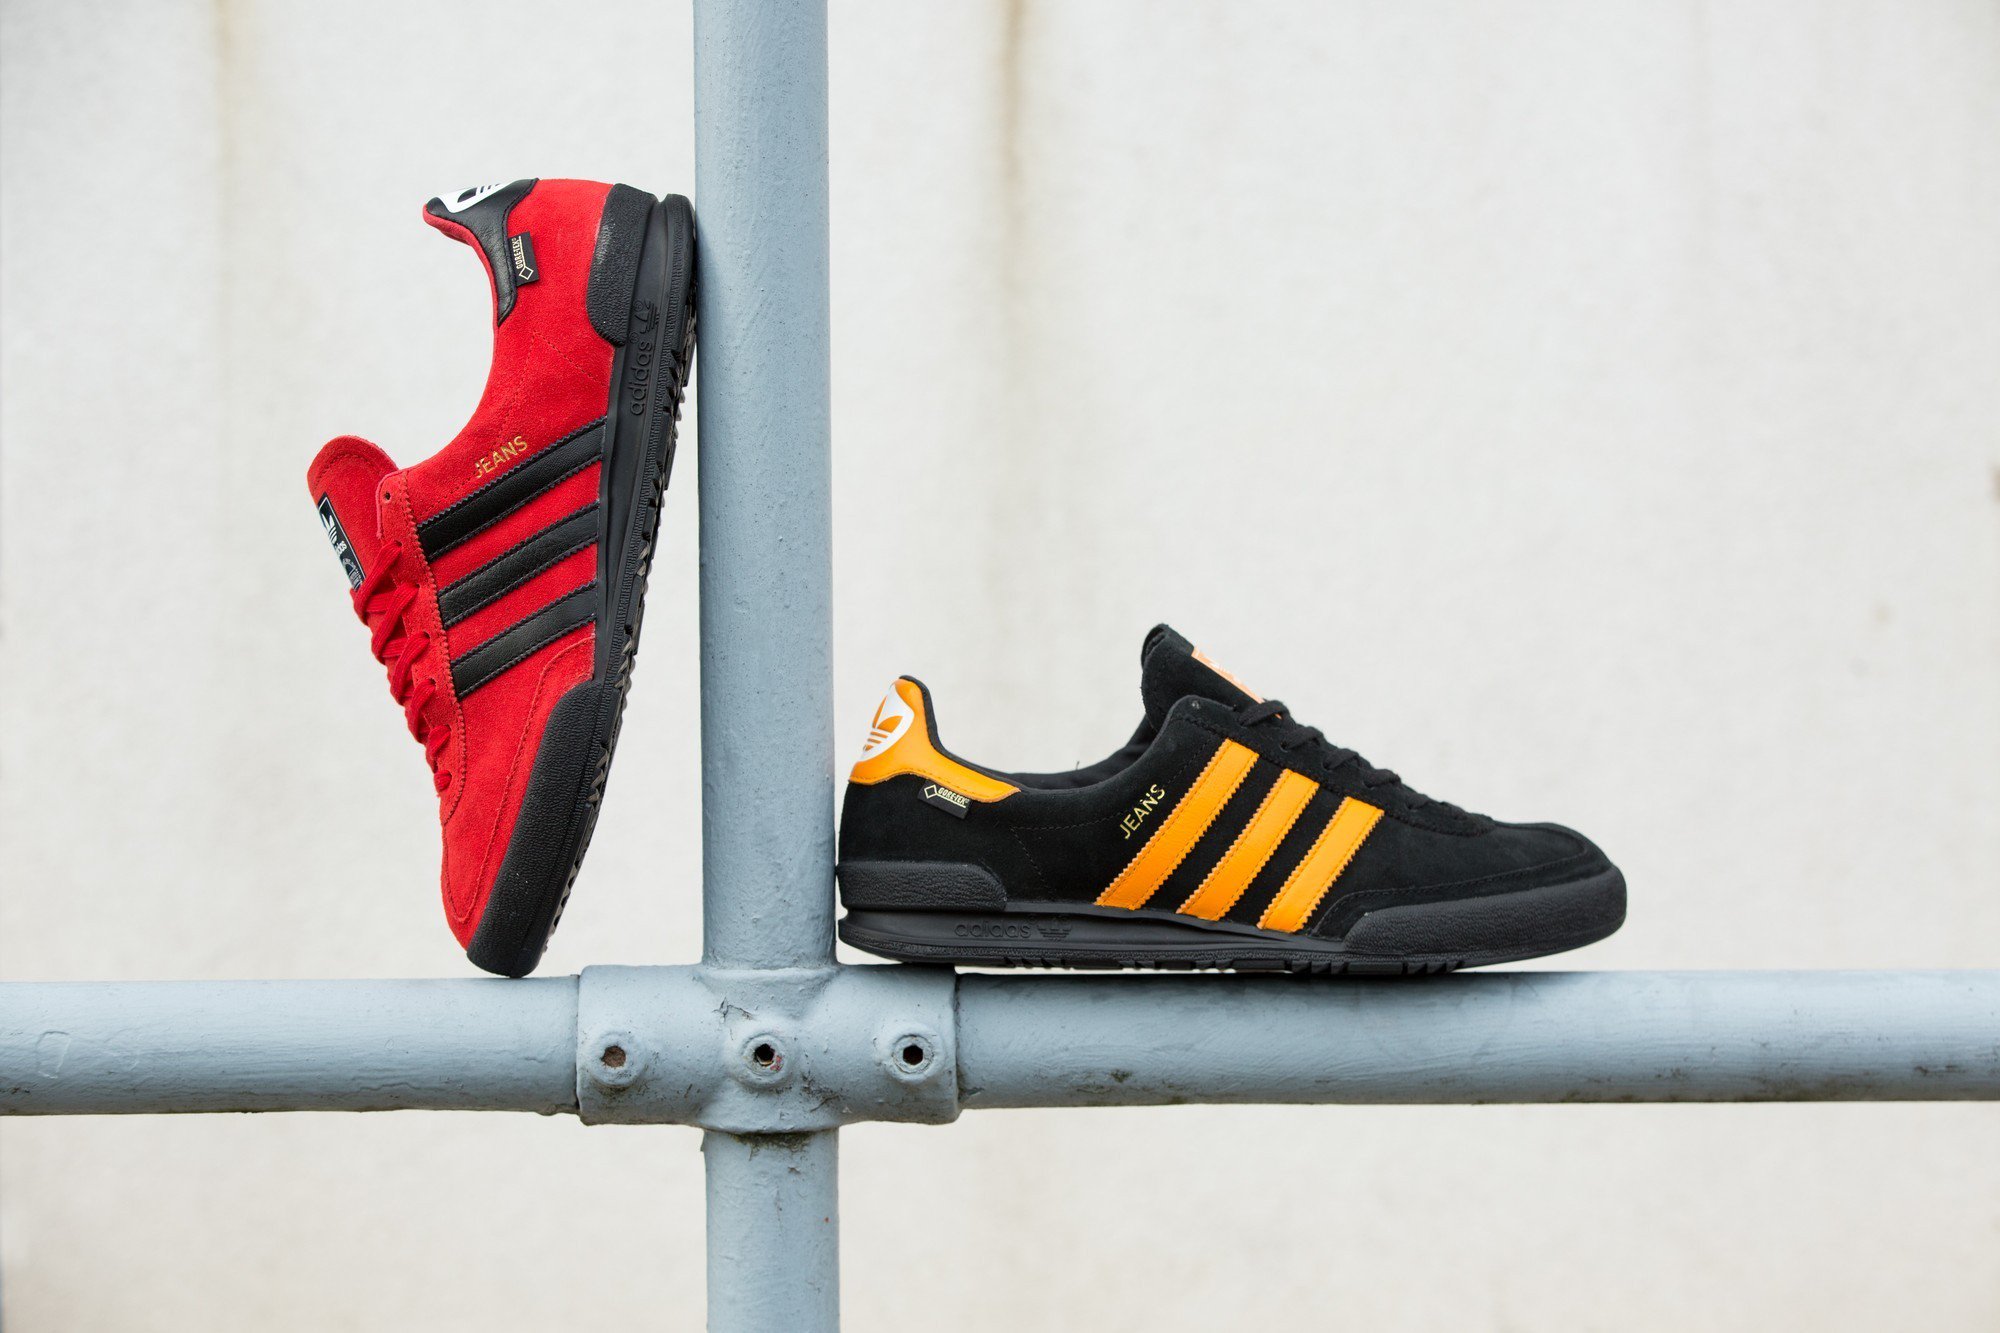 Drome on Twitter: "Check out the @adidasOriginals GTX now online! Red/ Black: Black/ Orange: 104245 #Drome #adidas #jeans https://t.co/P0j1mEX92o" / Twitter